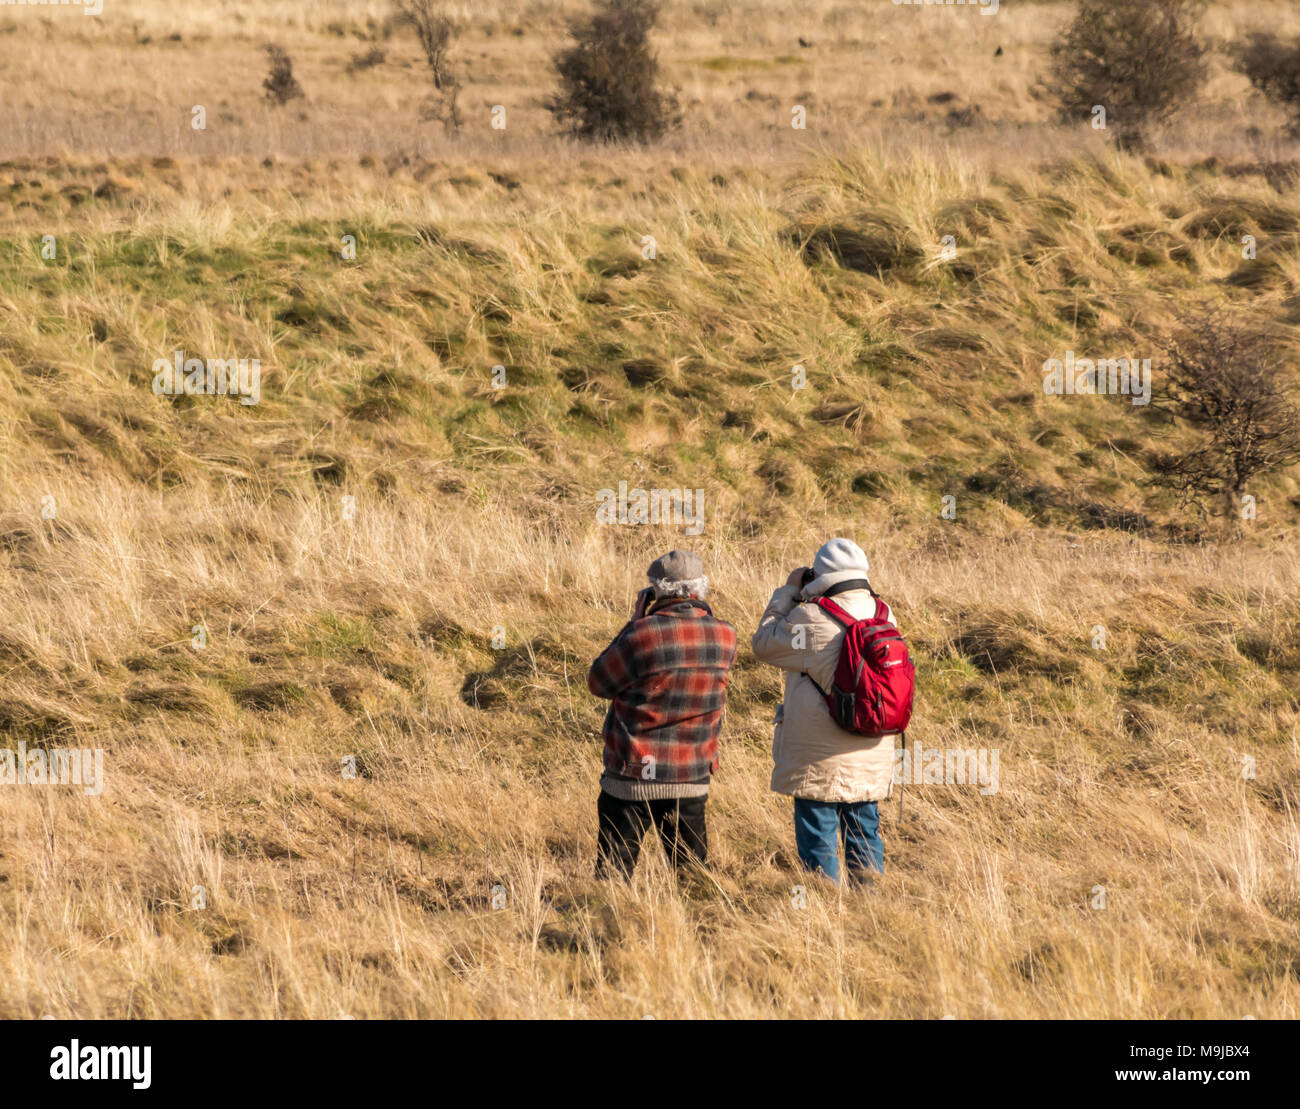 Aberlady Nature Reserve, Aberlady, East Lothian, Scotland, United Kingdom, 26th March 2018. A birdwatching couple with binoculars looking for birds Stock Photo